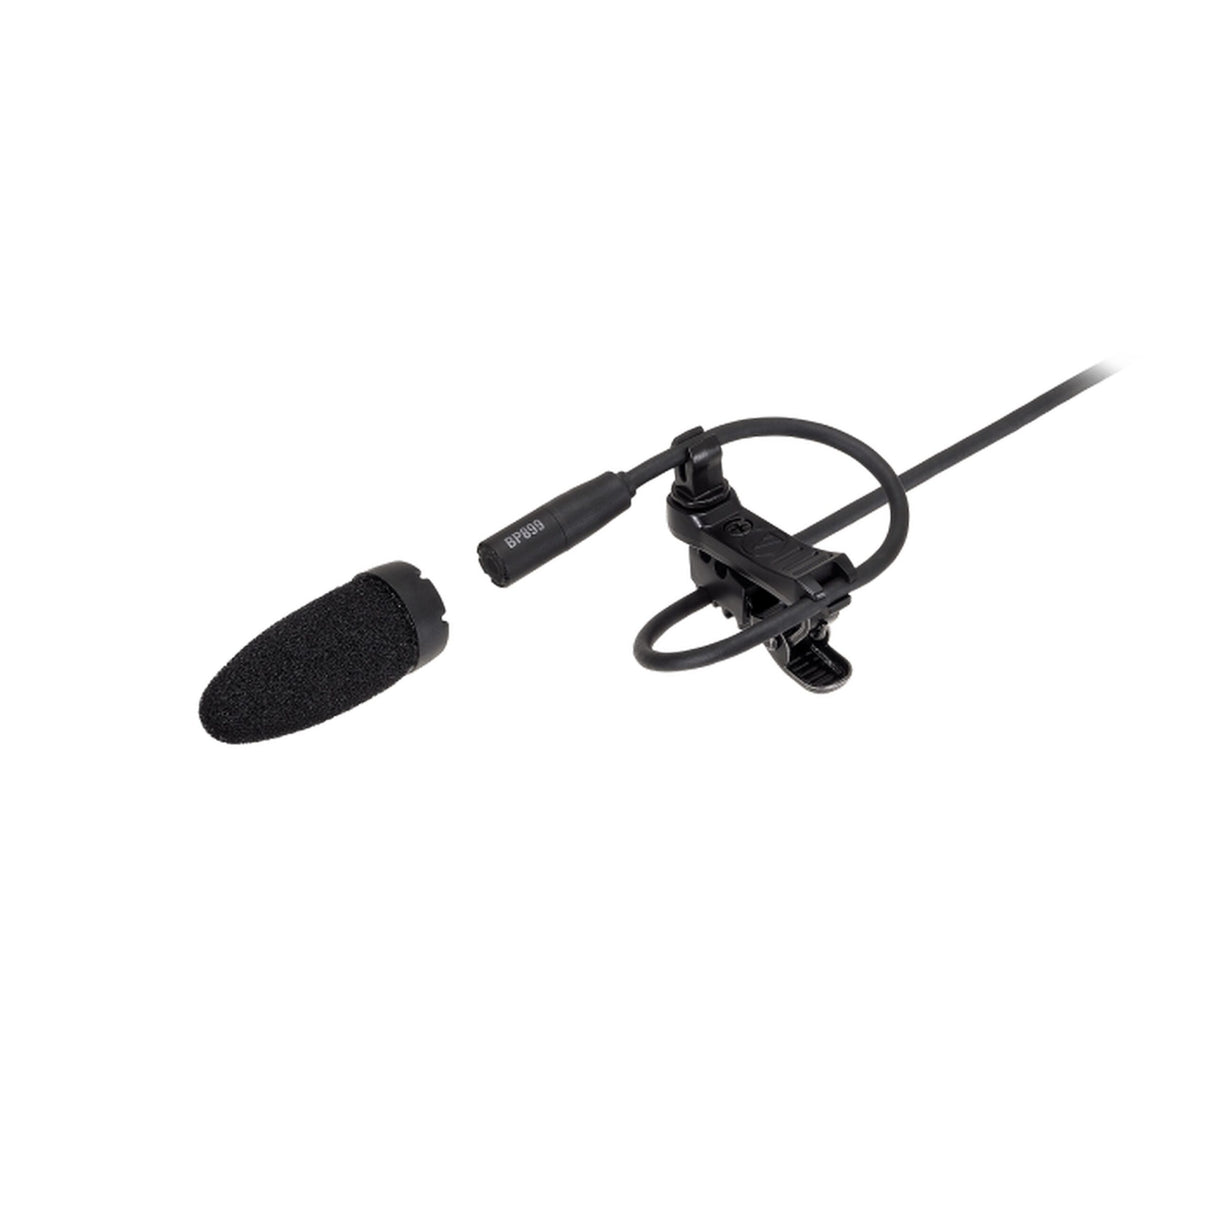 Audio-Technica BP899cH Omnidirectional Condenser Lavalier Microphone, 4 Pin Connector